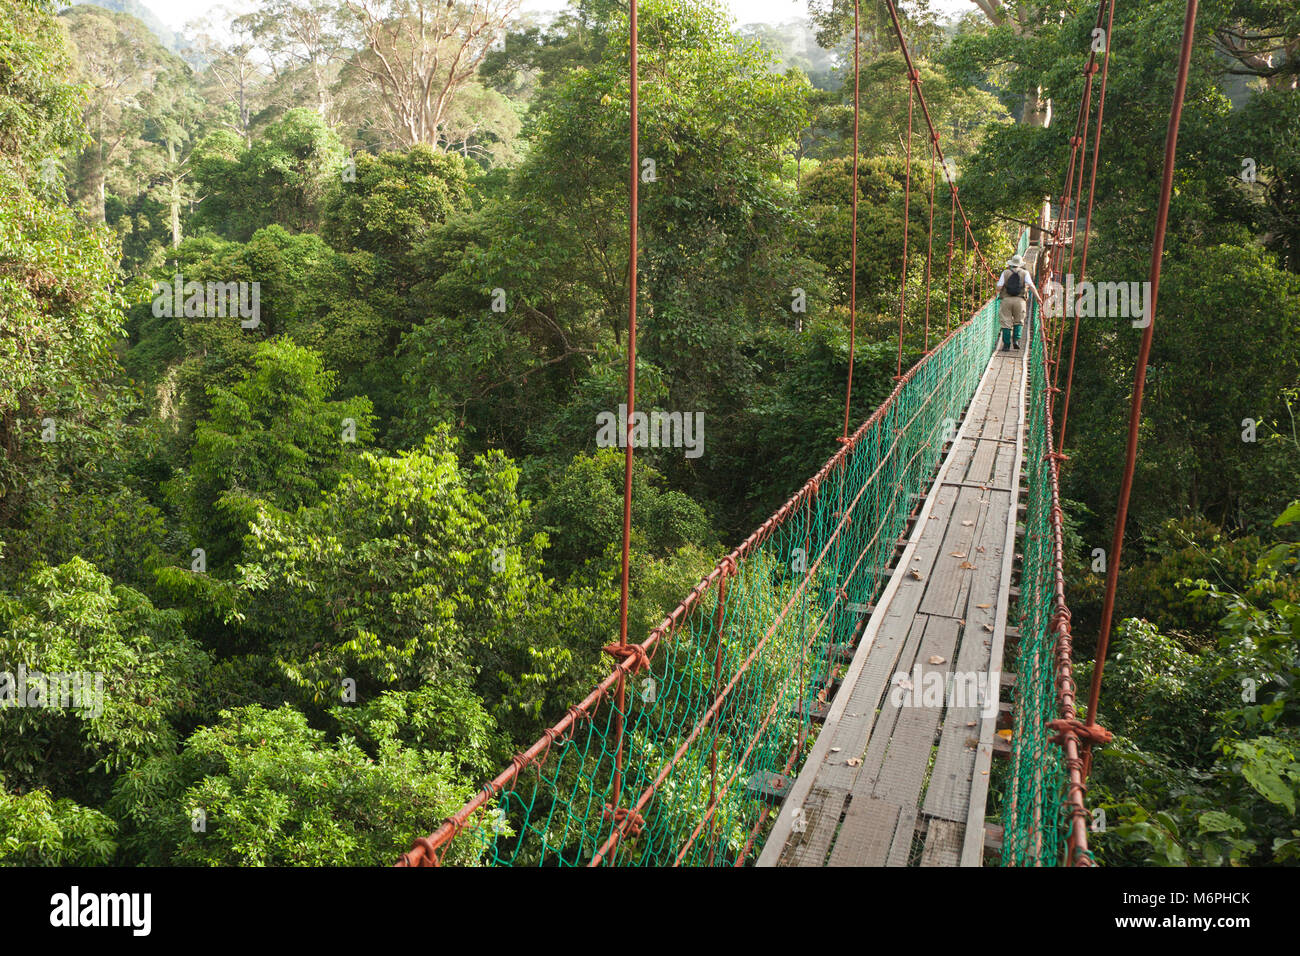 Aerial canopy walkway through tropical lowland rain forest trees at the Borneo Rainforest Lodge in Danum Valley, Sabah, Malaysia Stock Photo